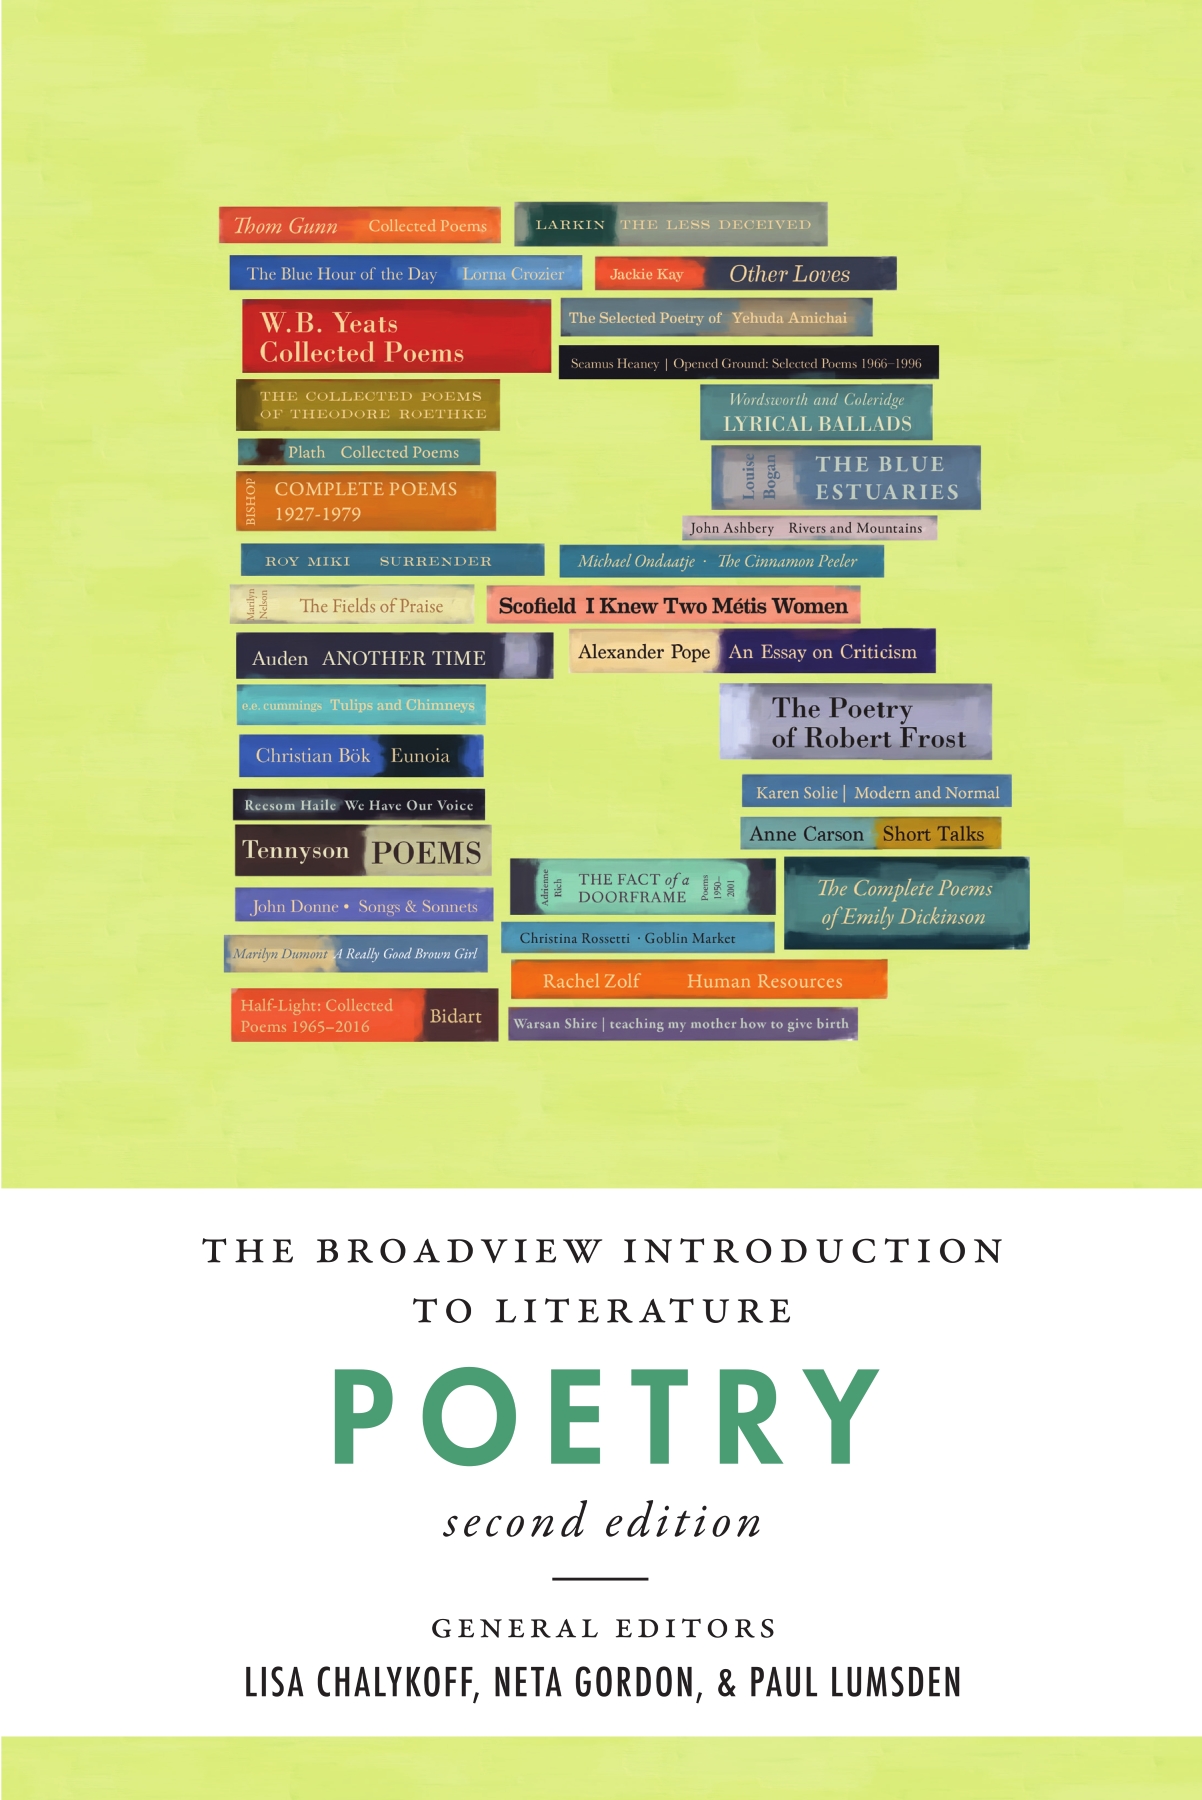 The Broadview Introduction to Literature Poetry Second Edition